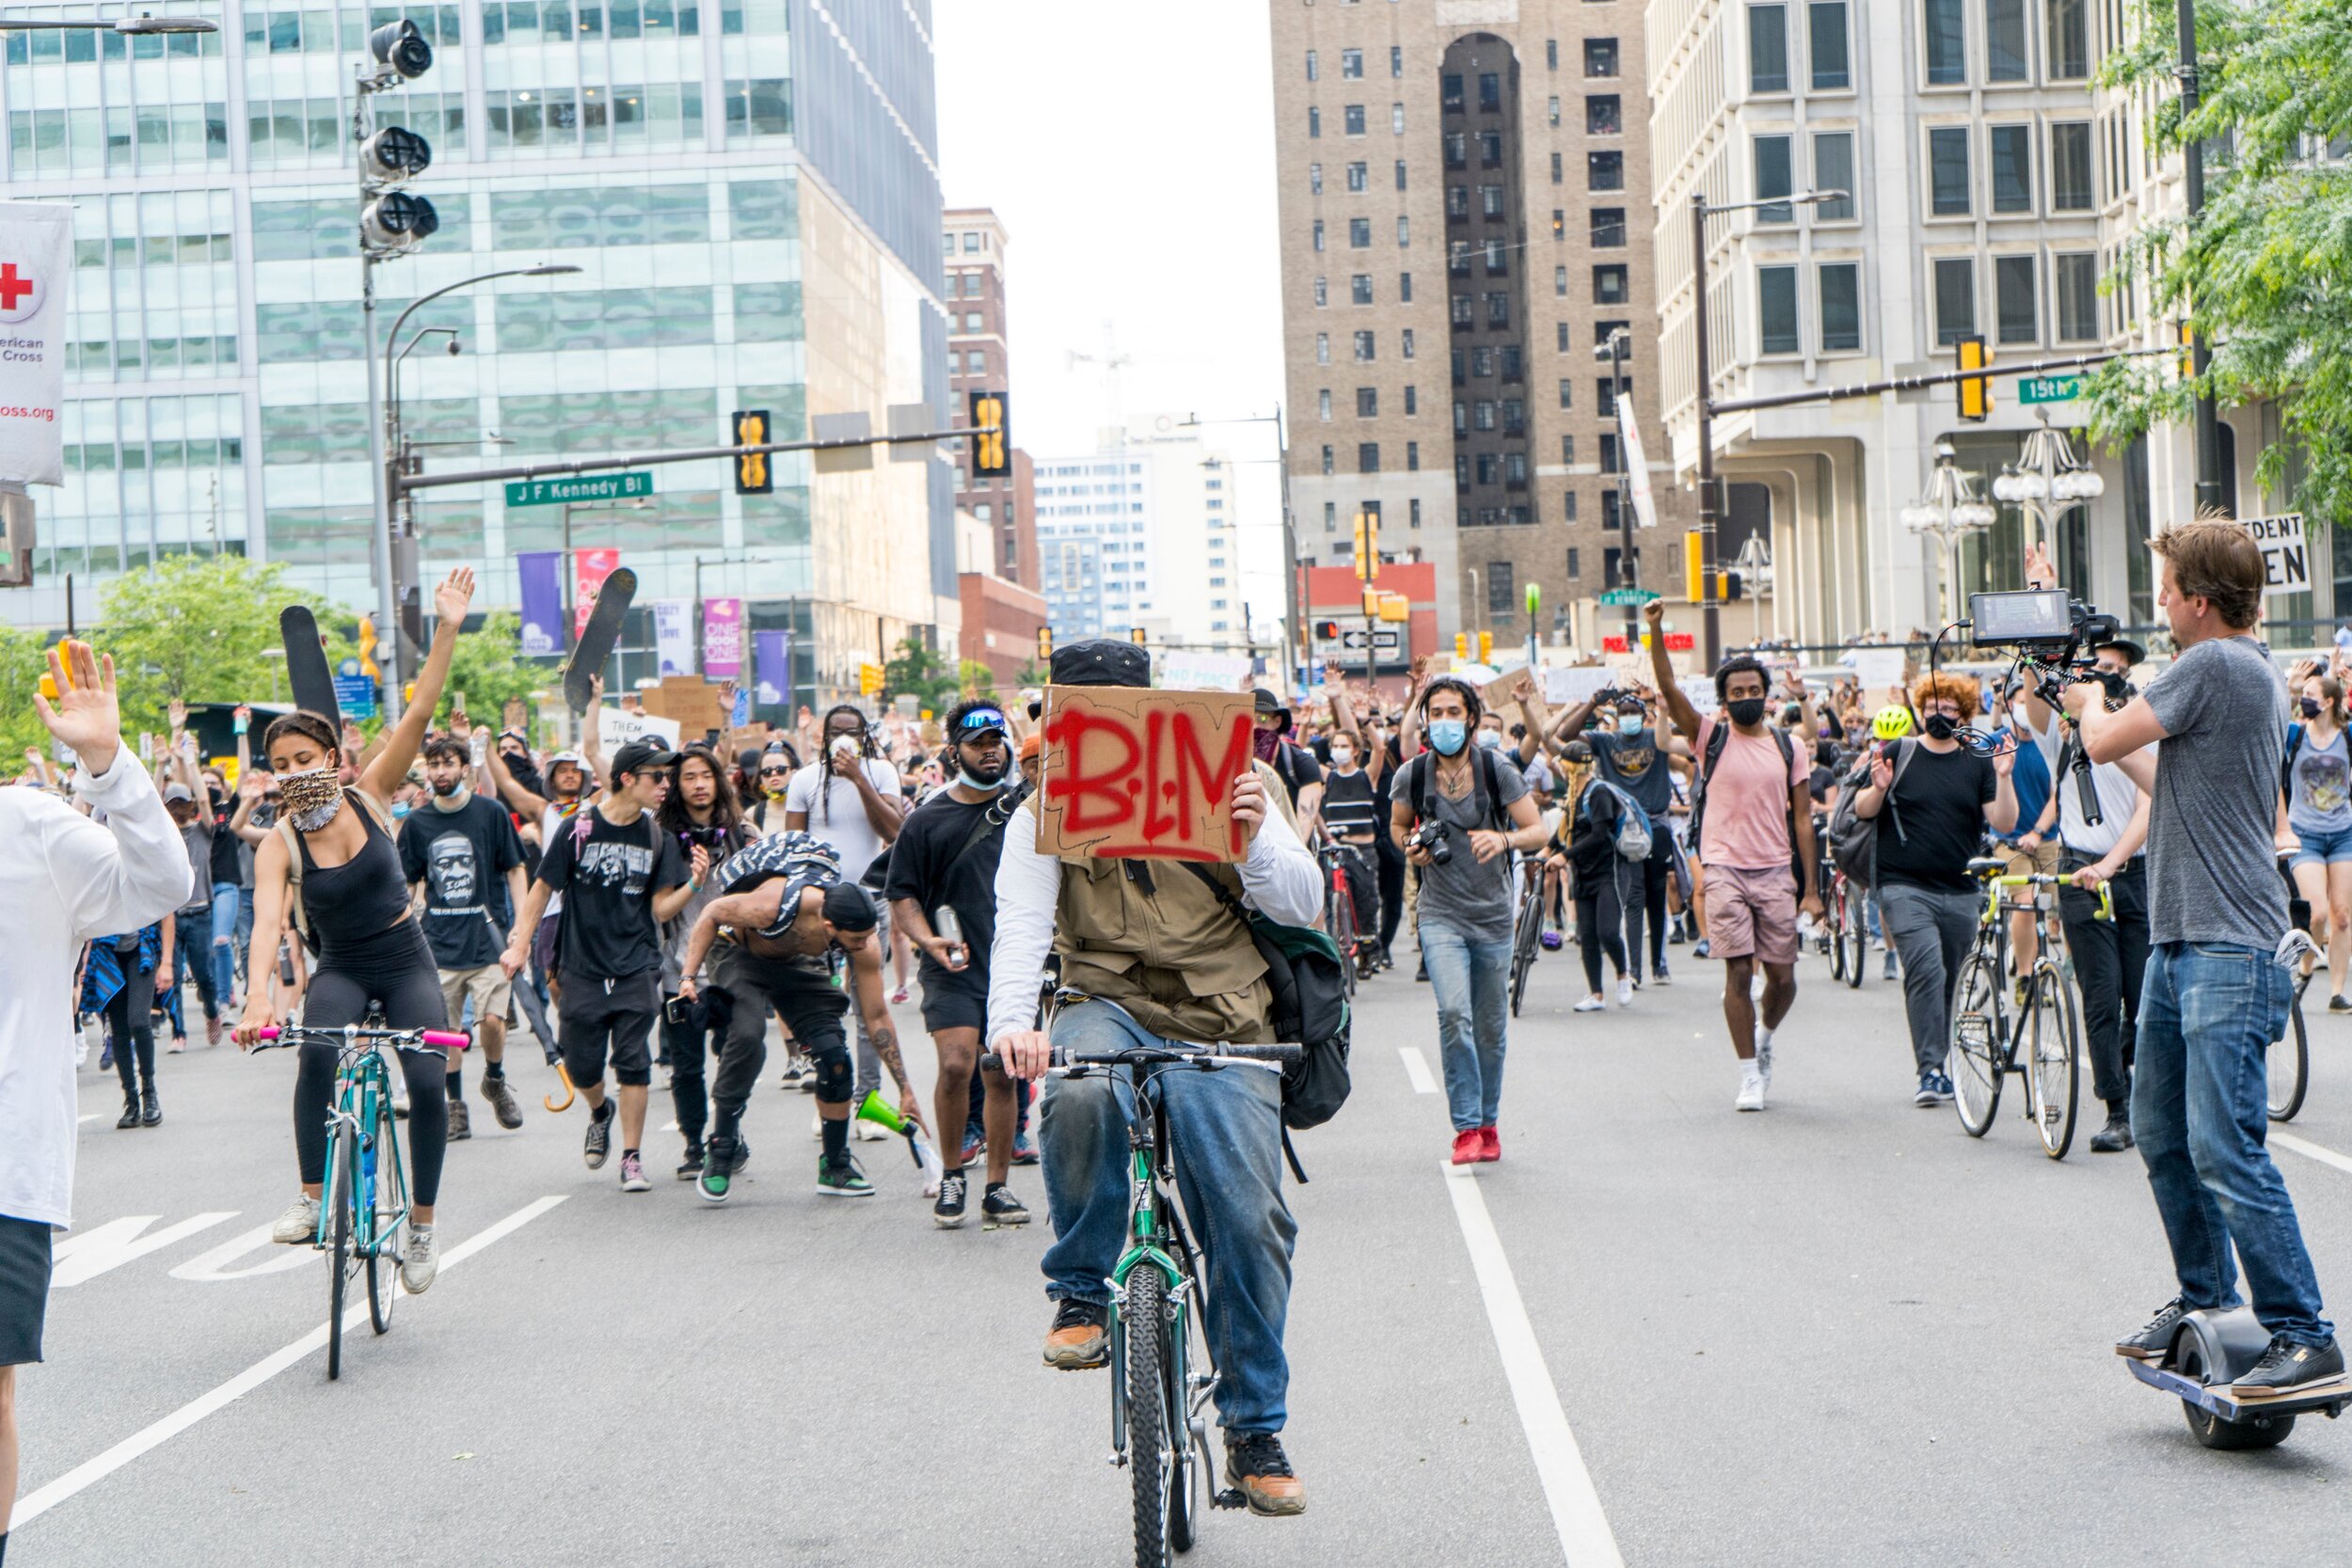 Black Lives Matter protesters march through Center City June 3.